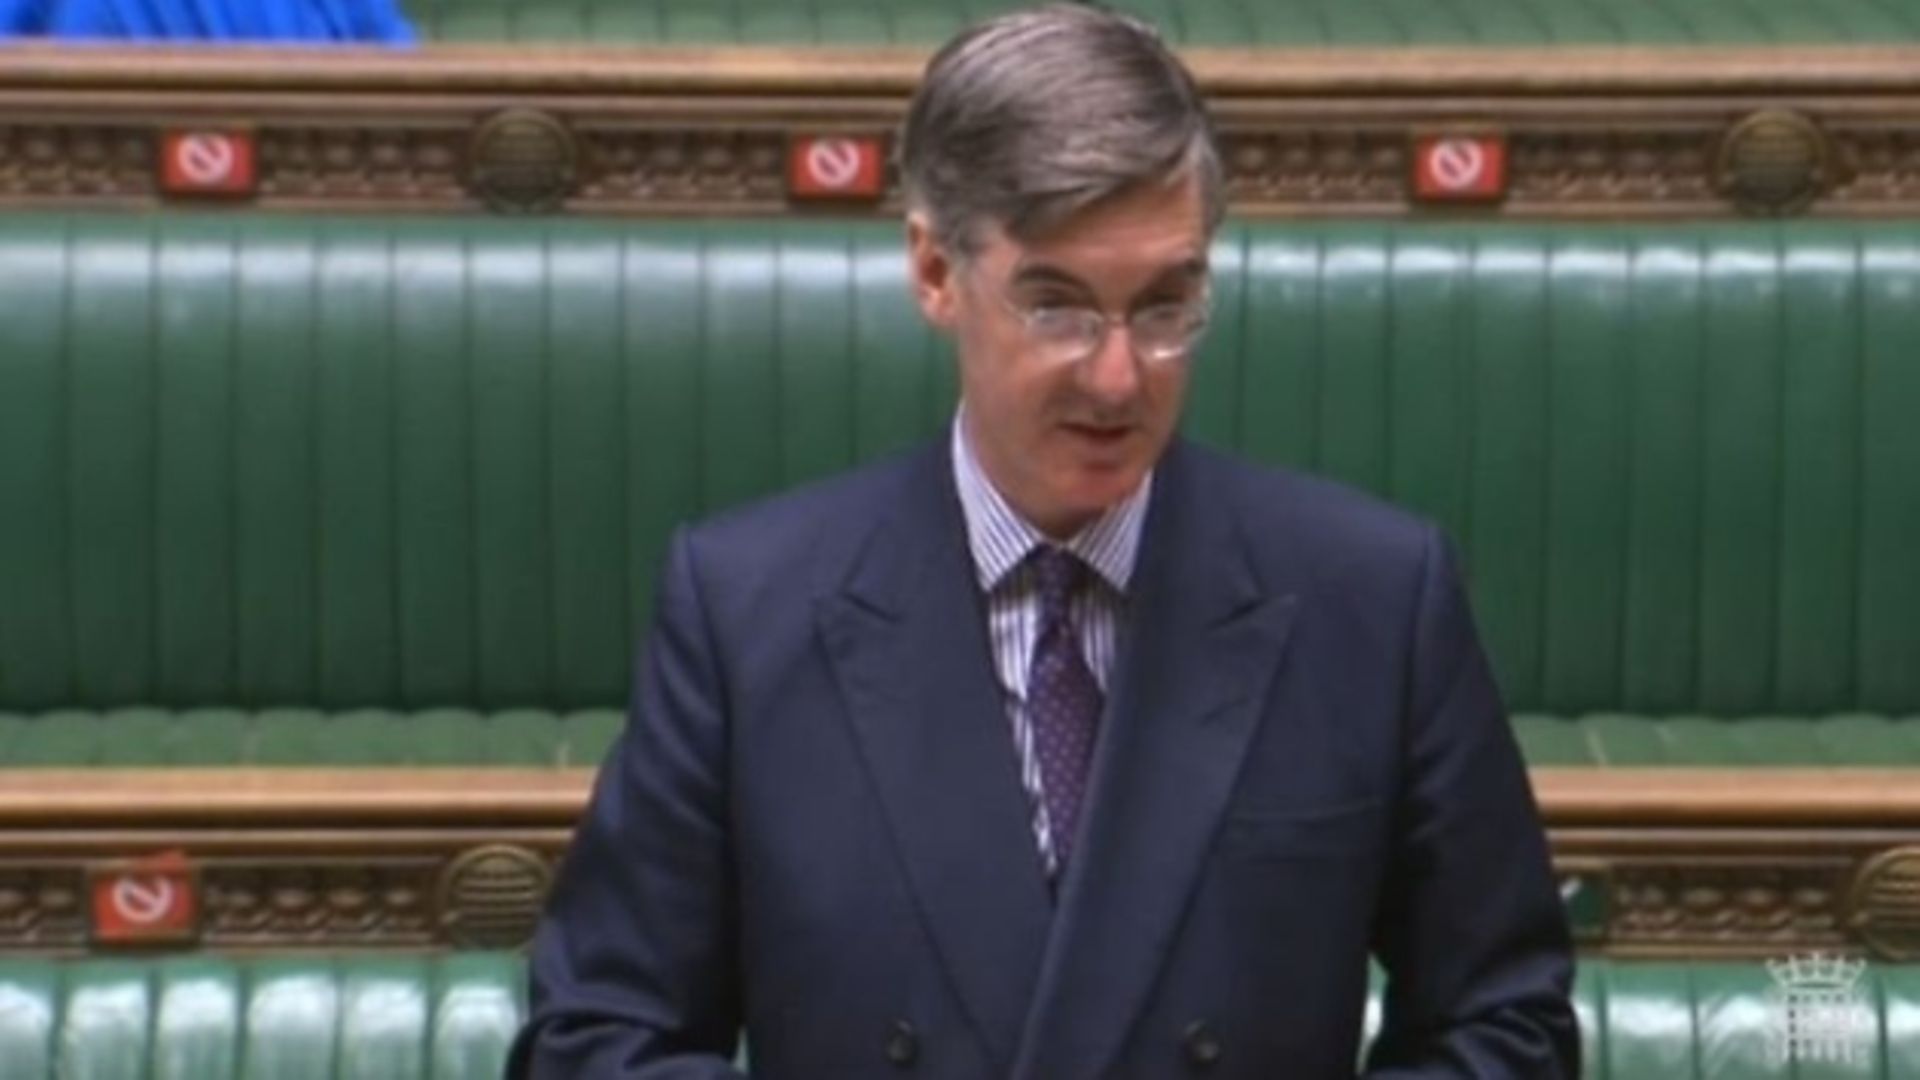 Jacob Rees-Mogg in the House of Commons. Photograph: Parliament TV.